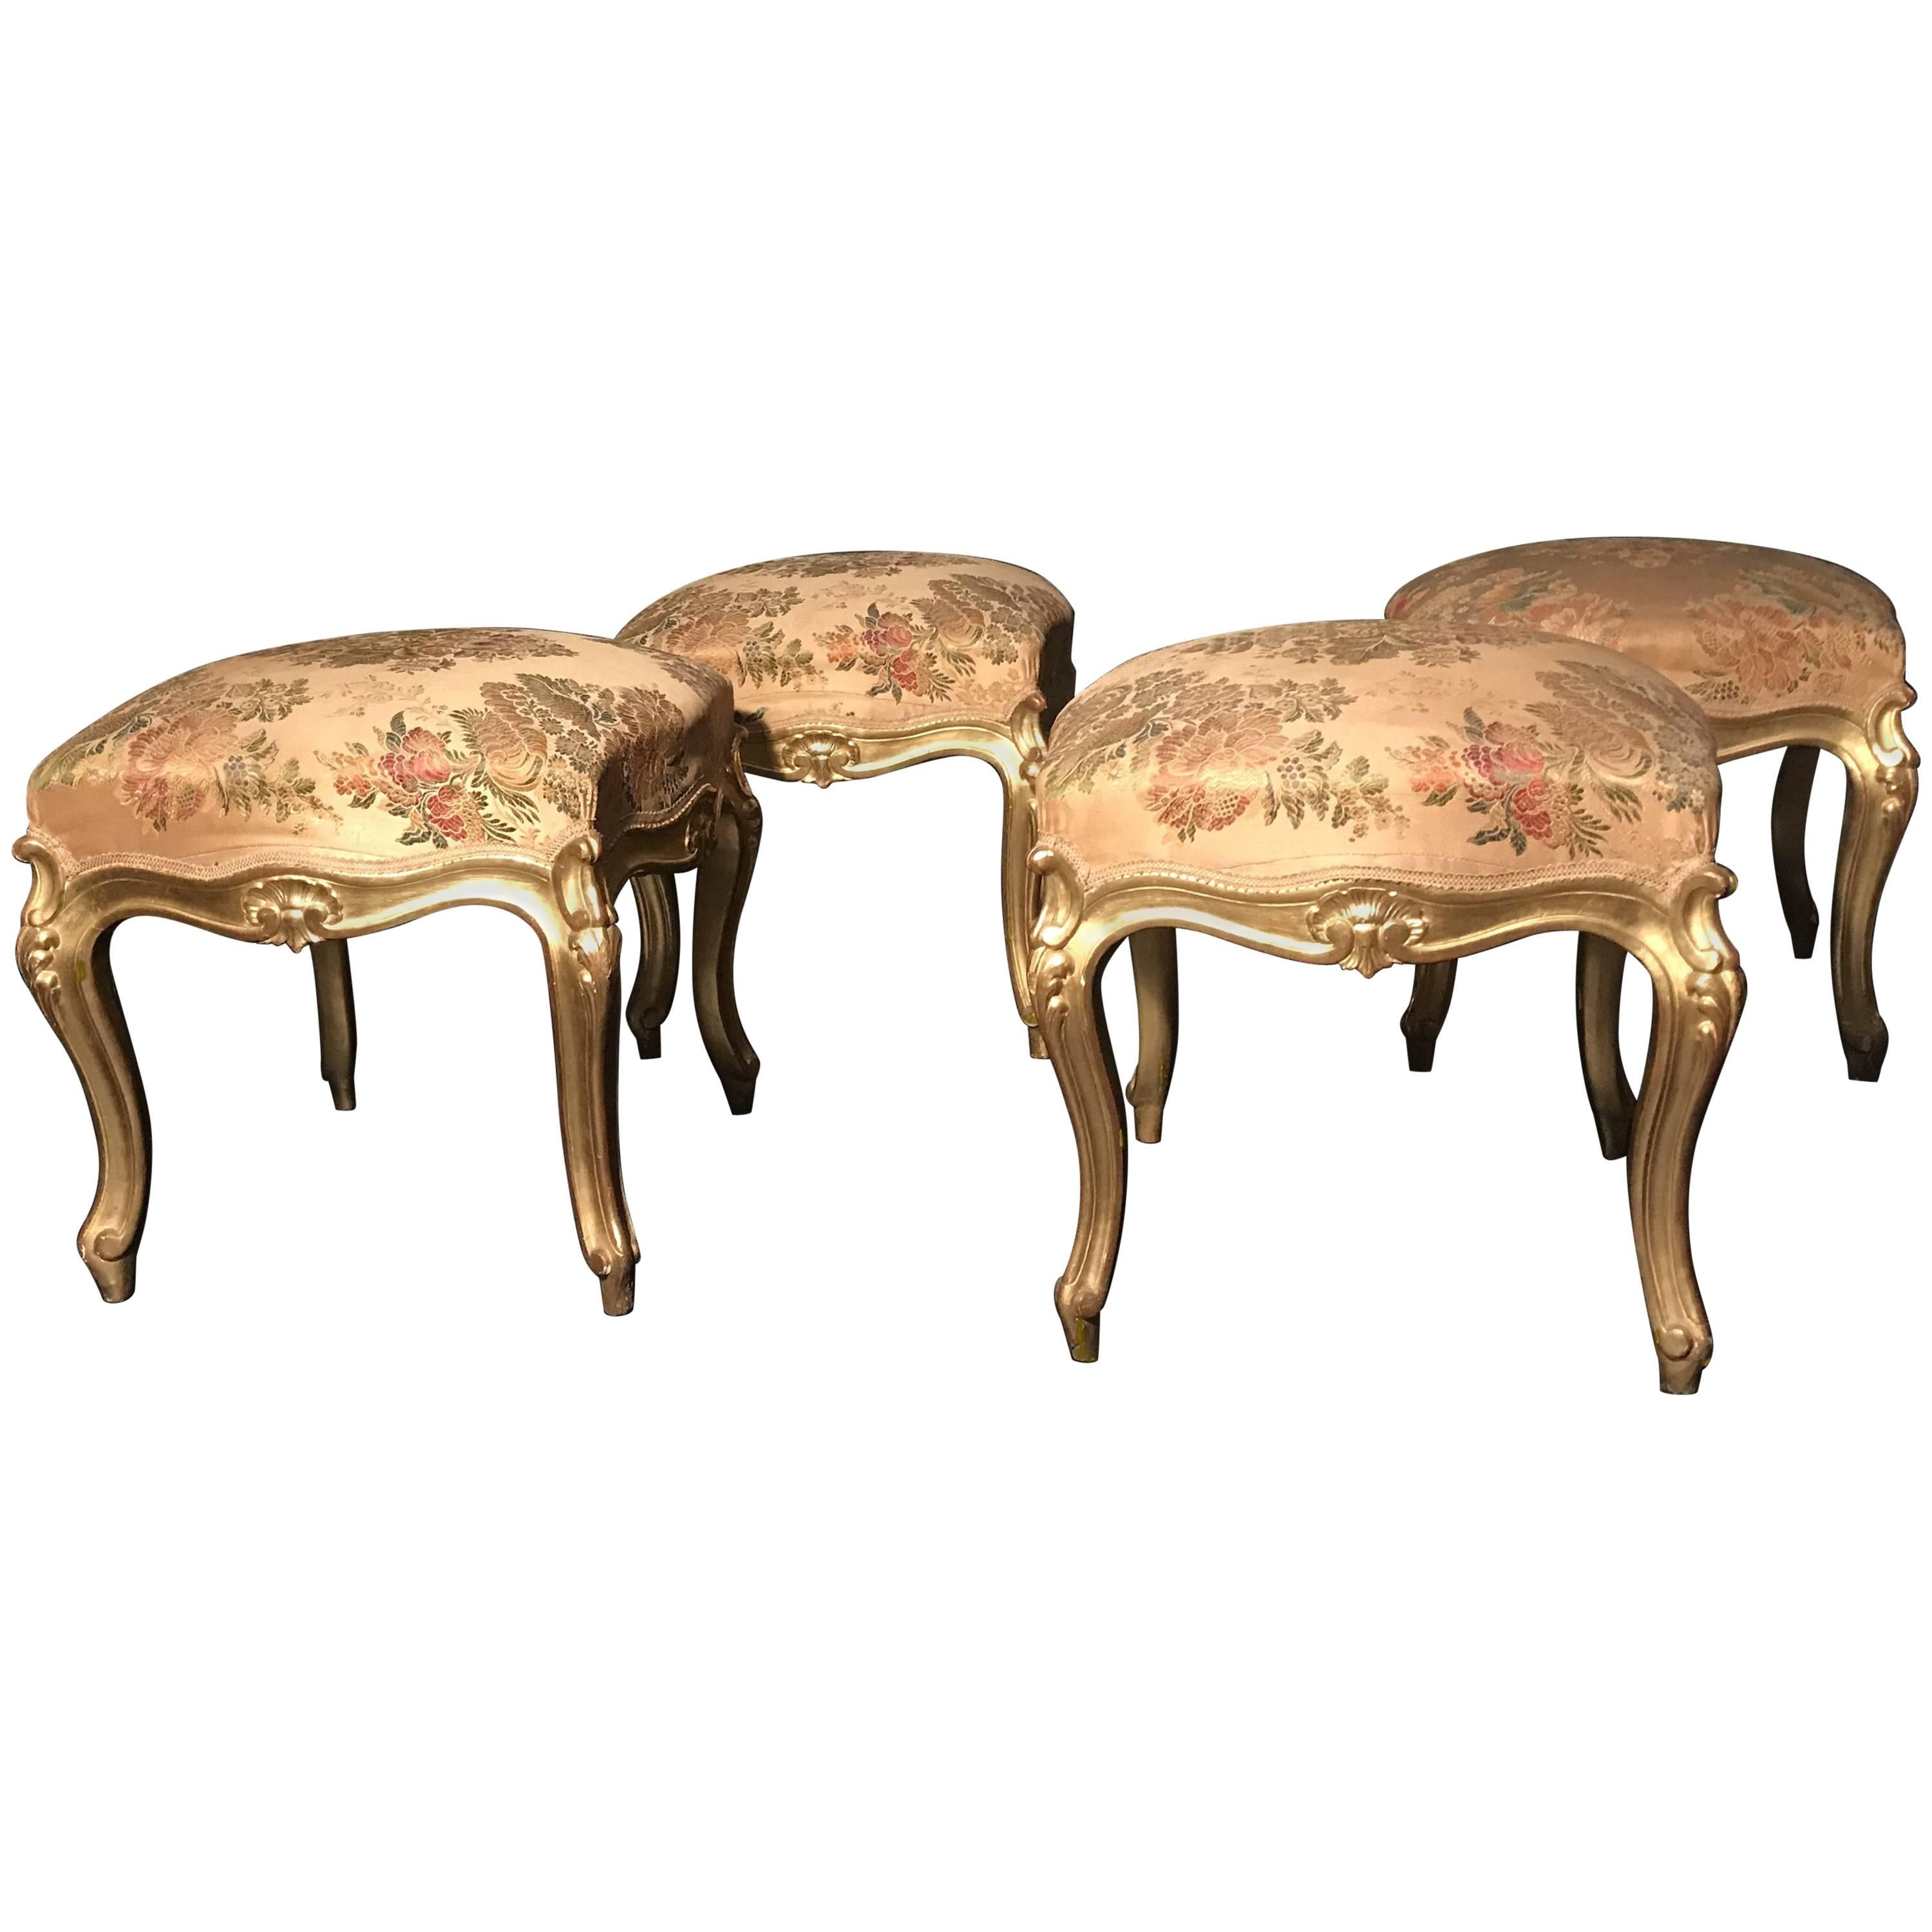 These finely carved and gilded square stools add a beautiful touch to your living spaces. They are carved on all four sides with elegant cabriole legs. Excellent condition of gilding.
This set is part of an eleven piece s salon set published